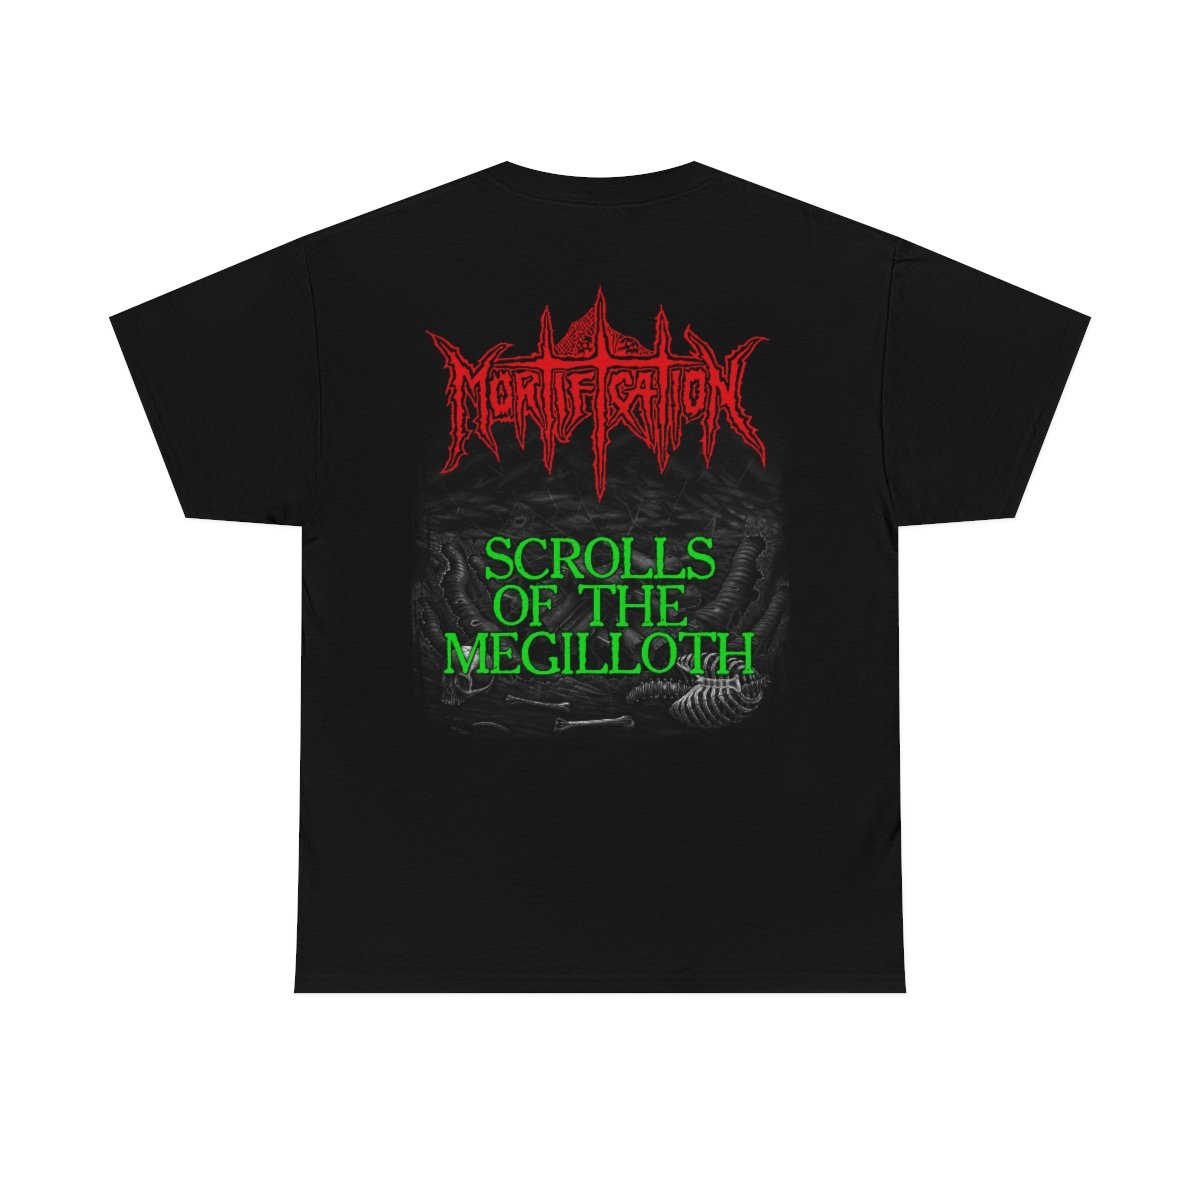 Mortification – Scrolls of the Megilloth Two Sided Short Sleeve Tshirt